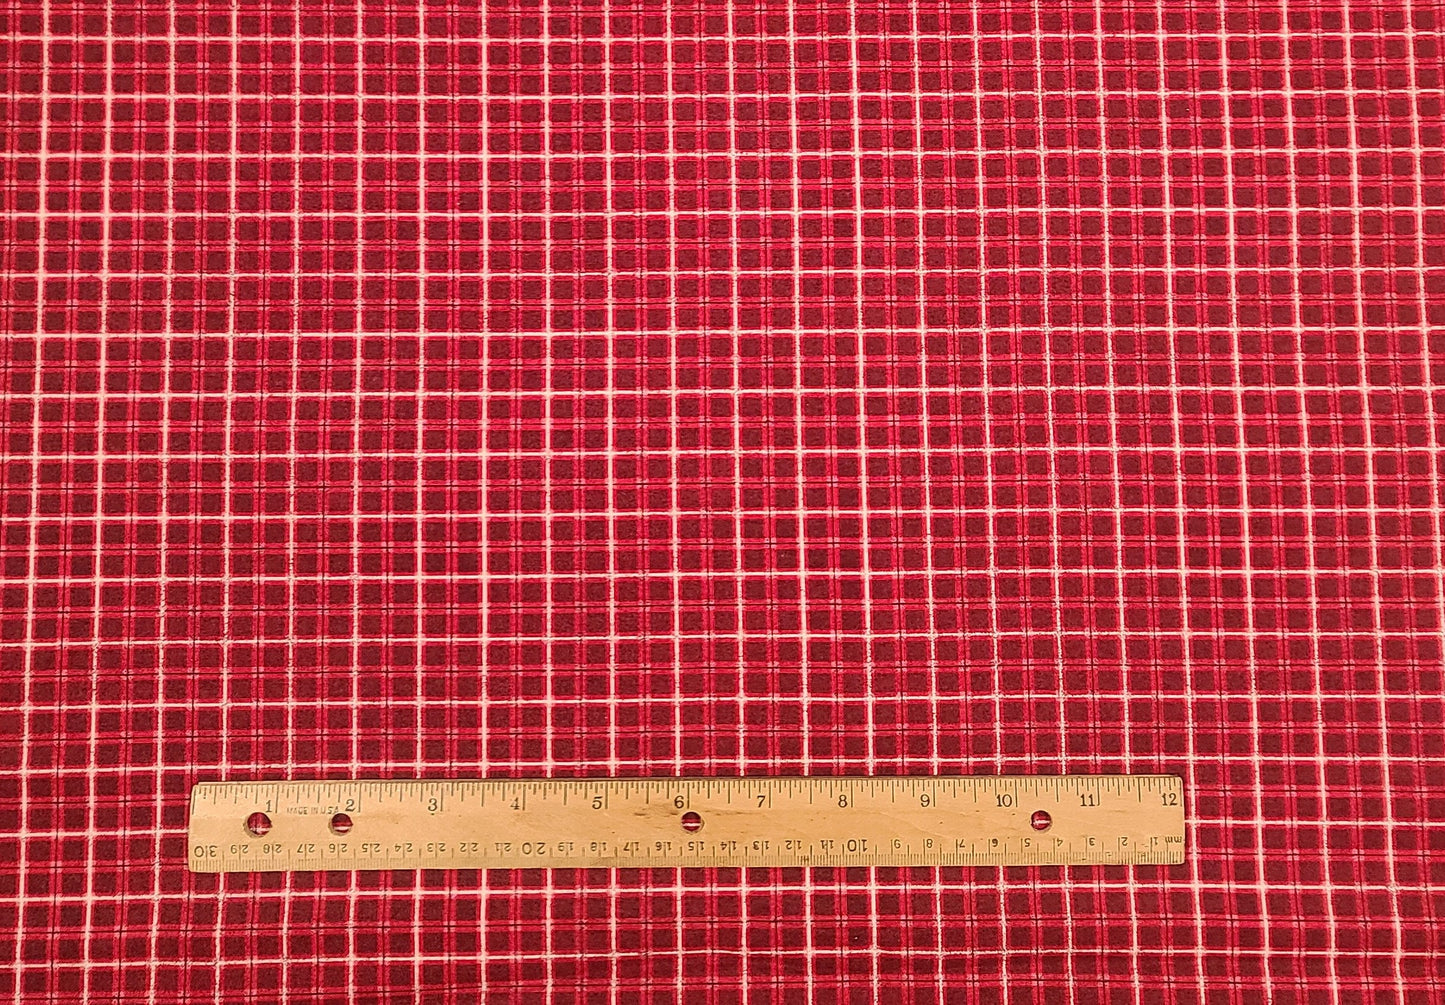 Designed Exclusively for Joann - Dark Red, Red, White and Black Windowpane Plaid Fabric